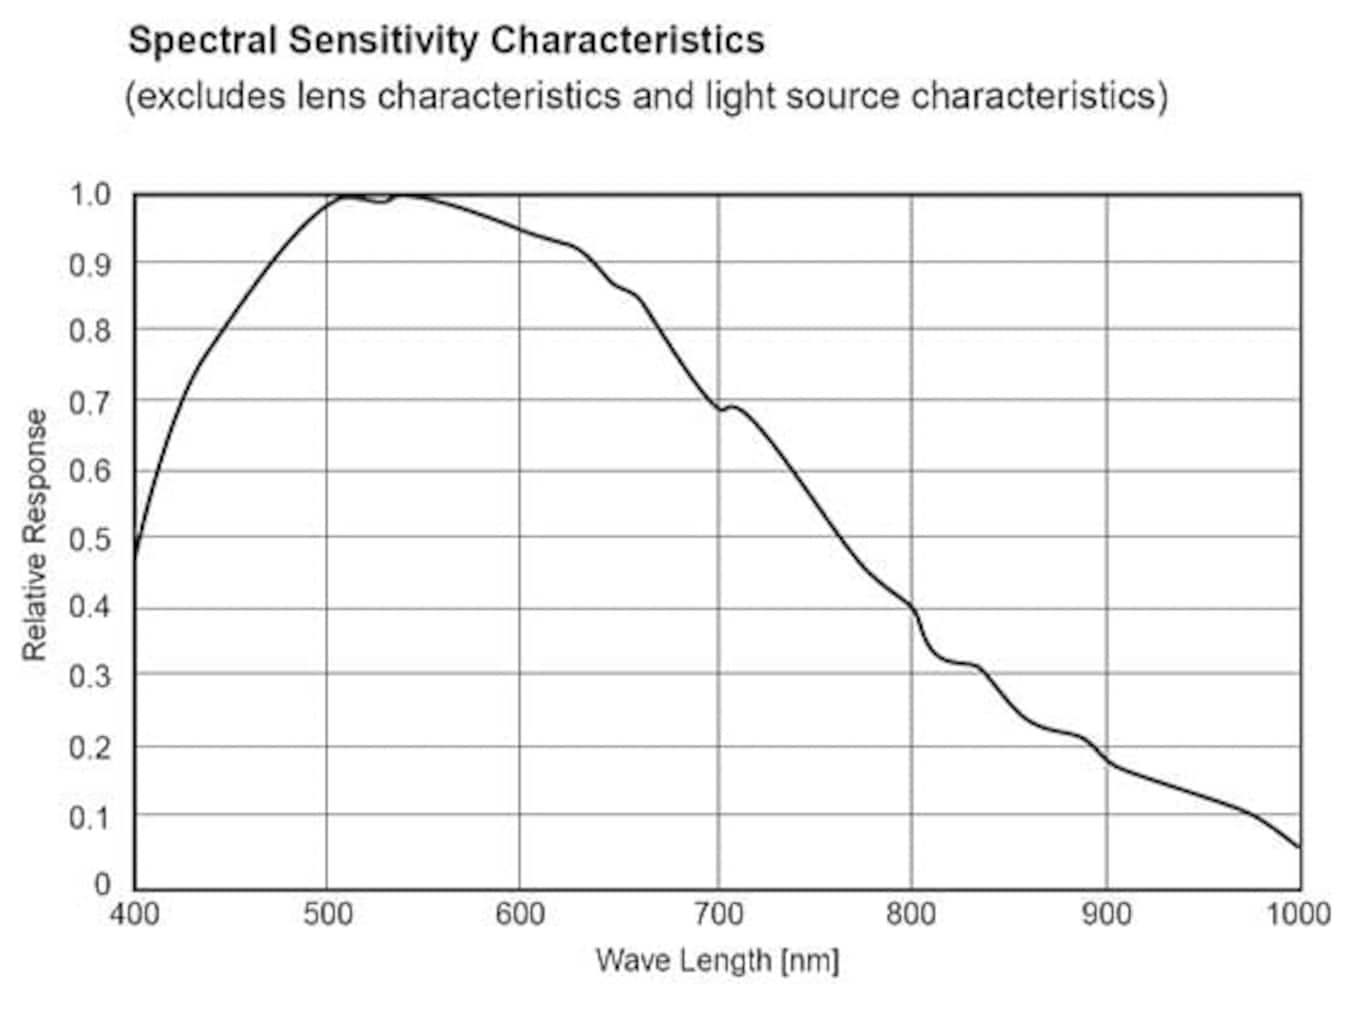 Curve of the spectral sensitivity of a Sony CCD sensor